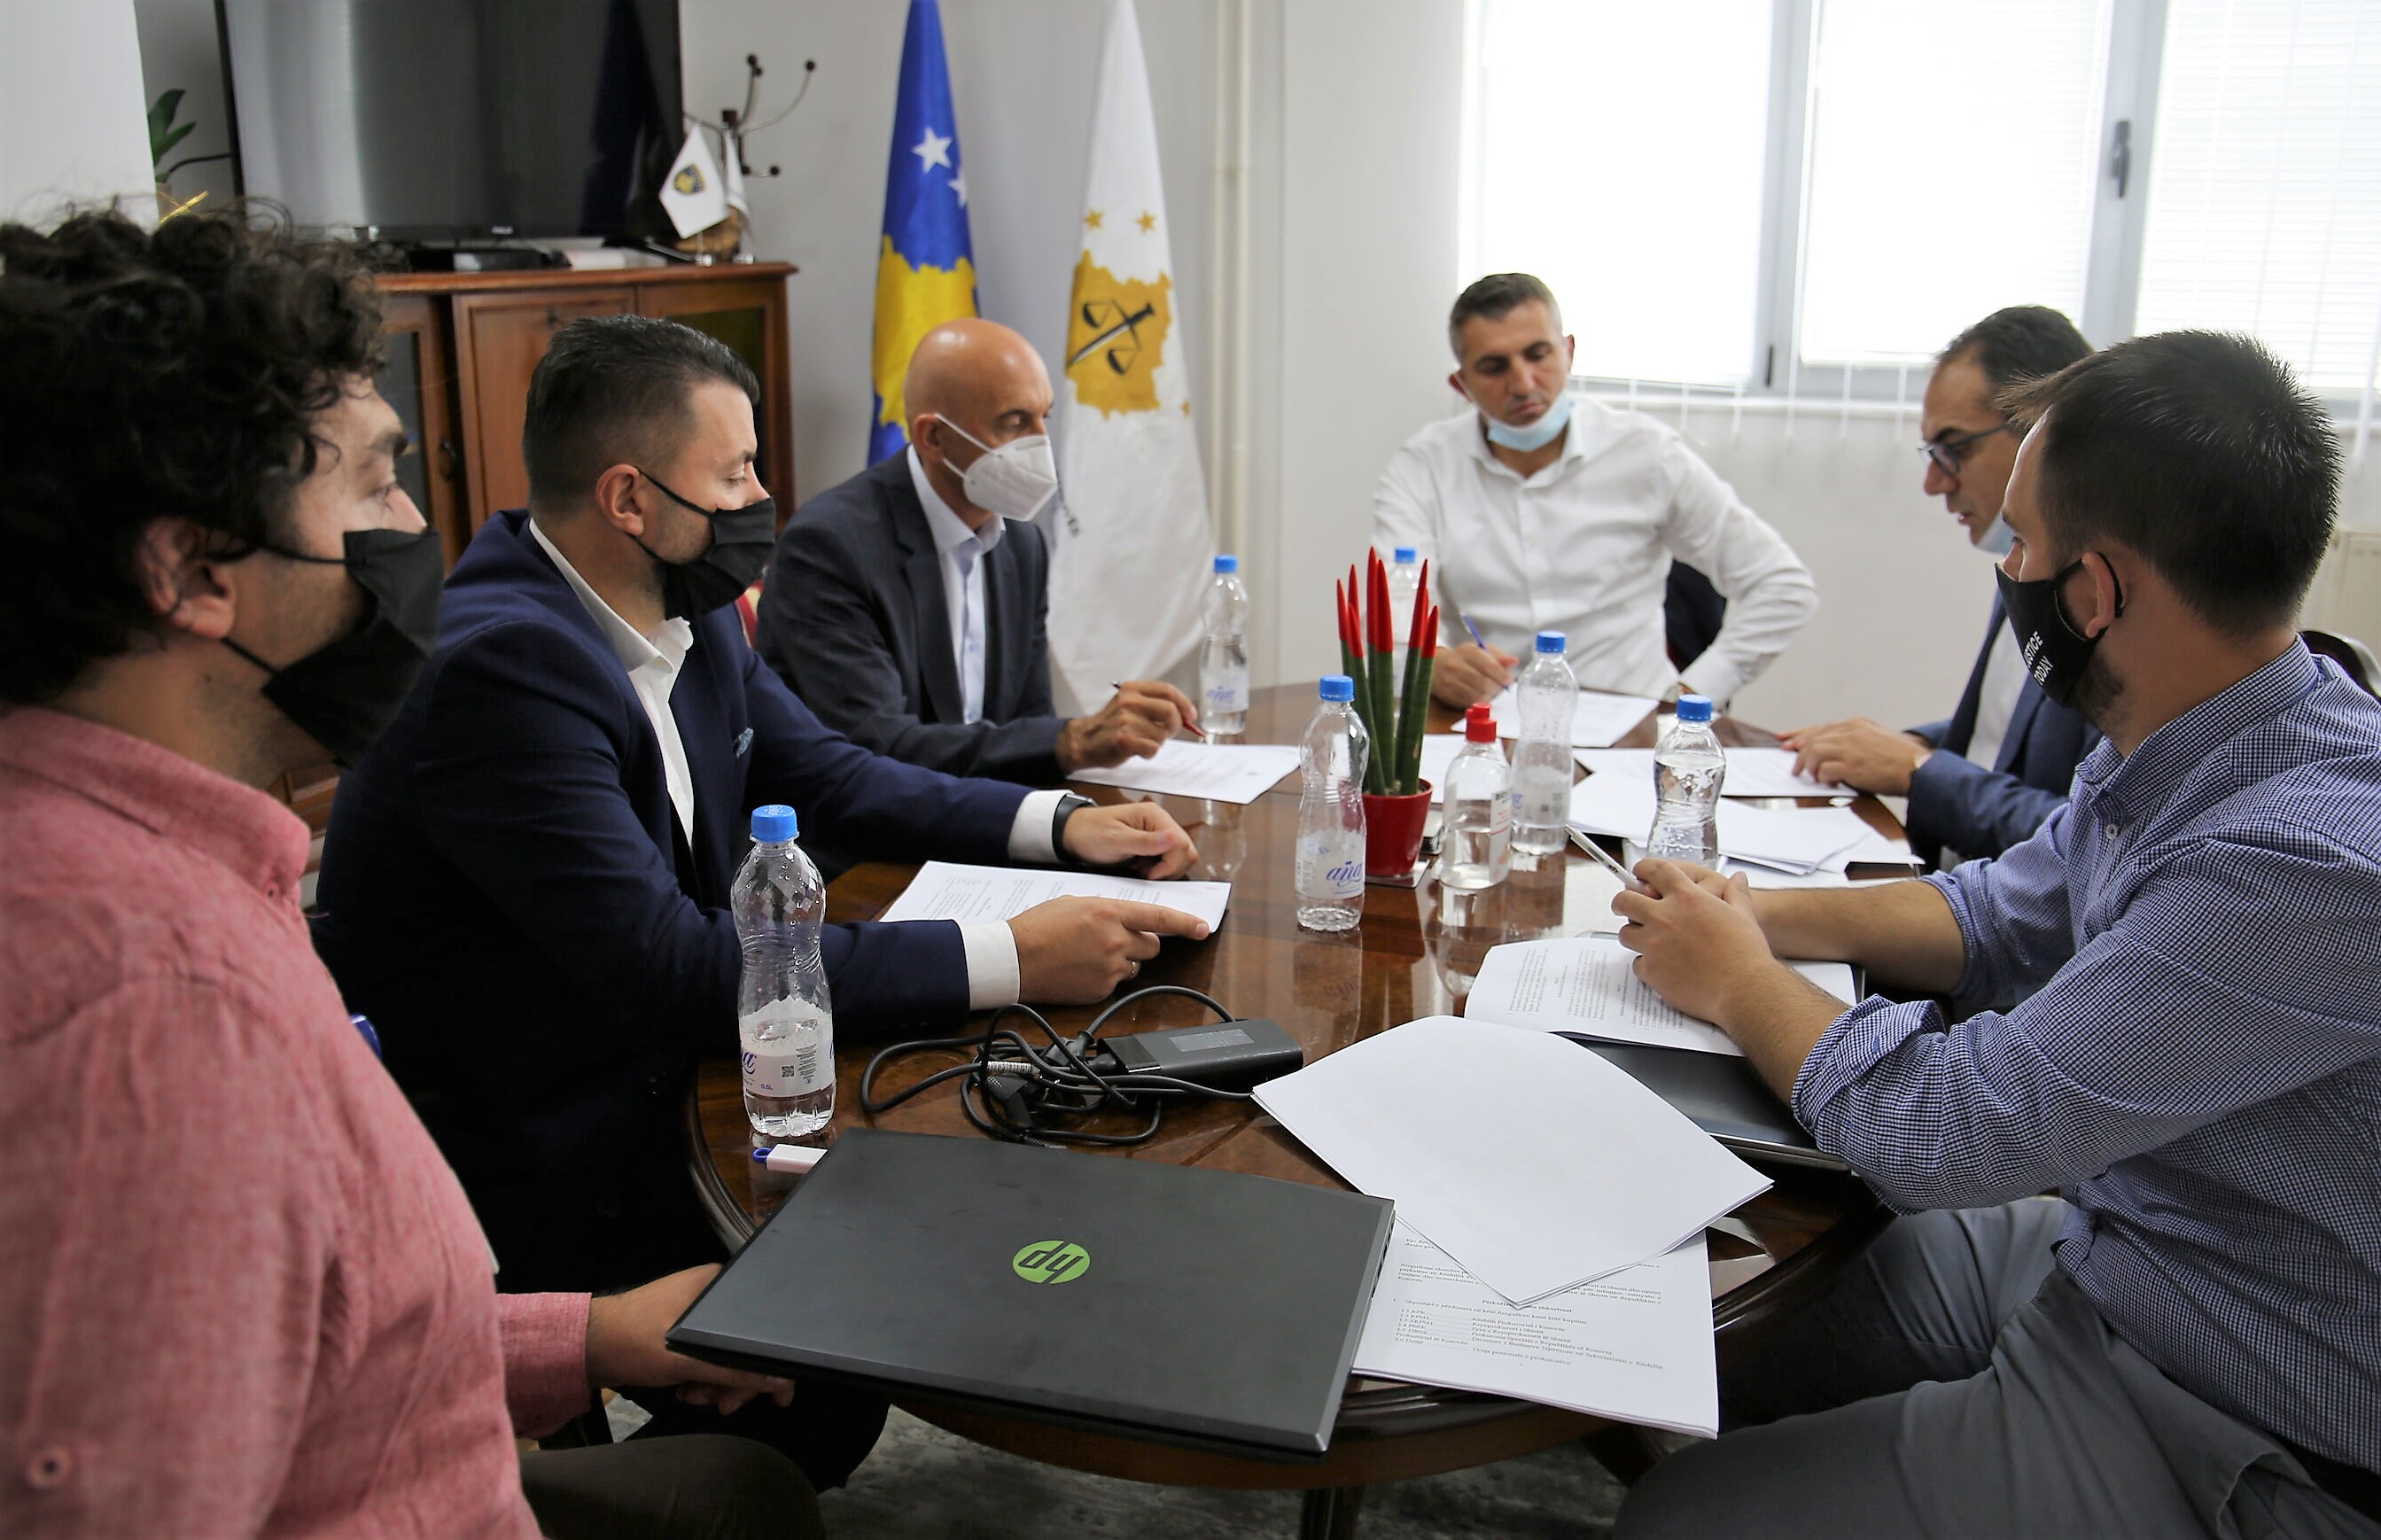 The Draft regulation for the personal file of the State Prosecutor is finalized